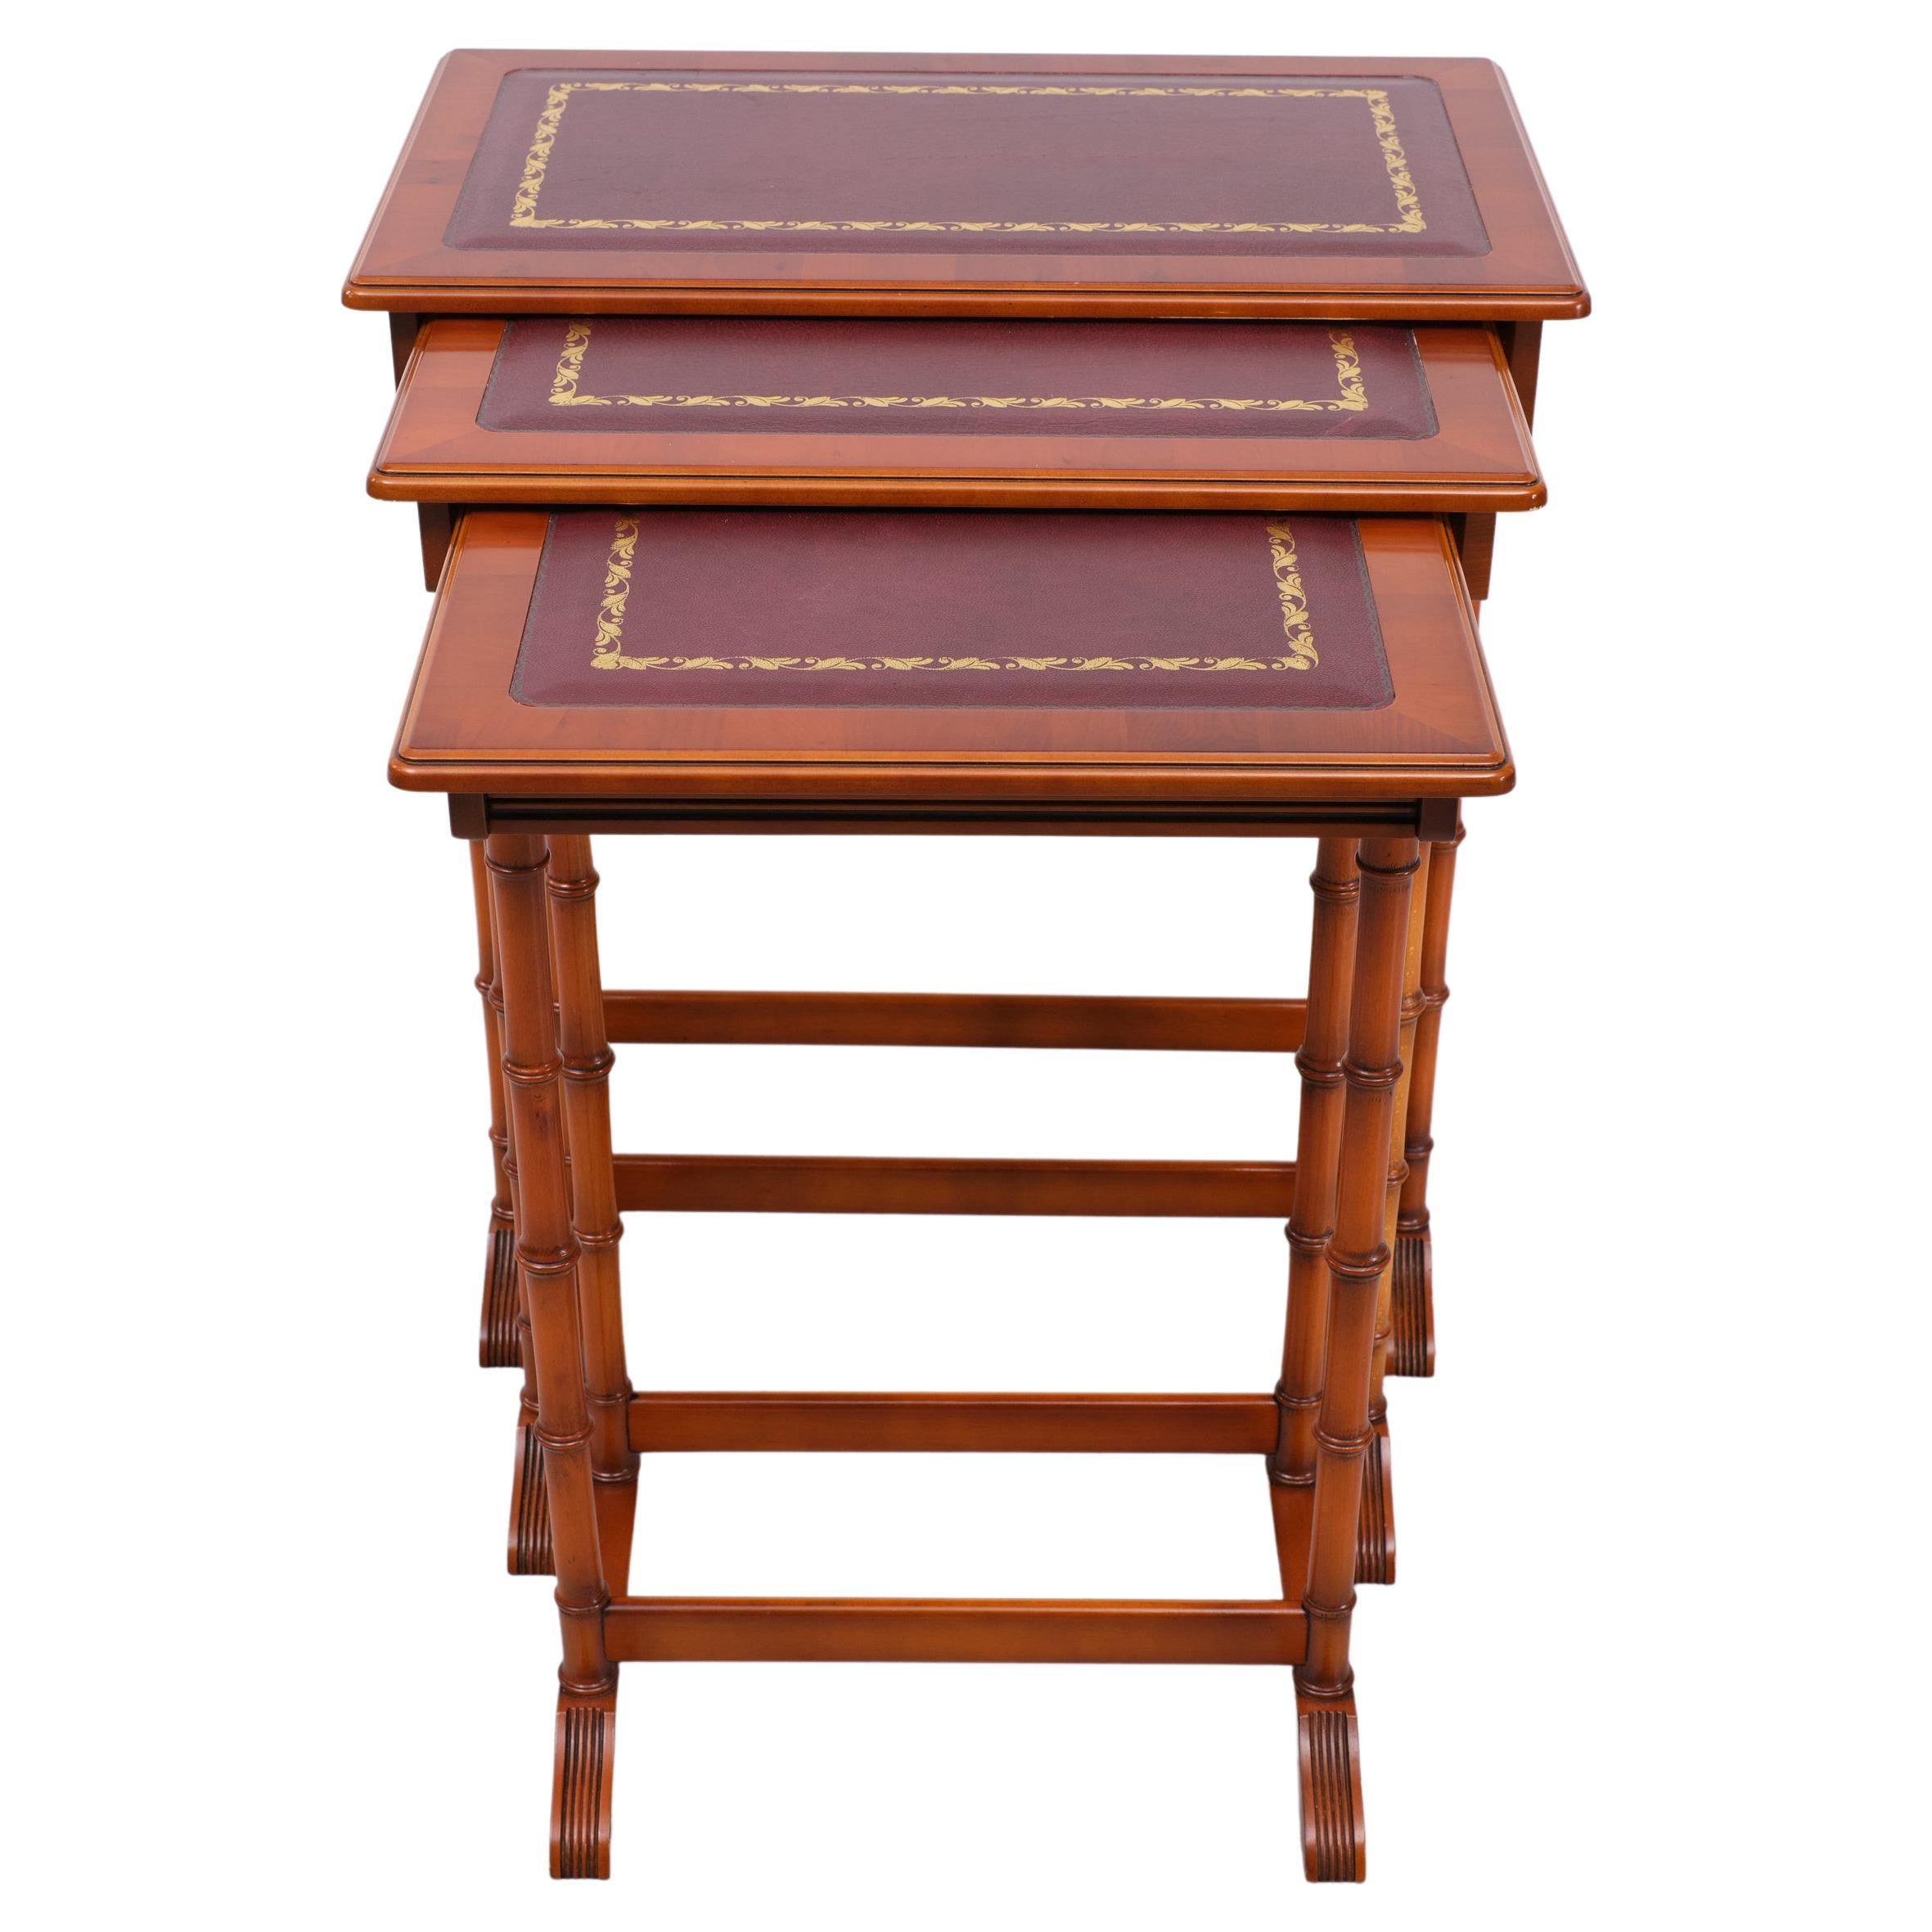   Exclusive English furniture  Cherry wood nesting tables  1970s 